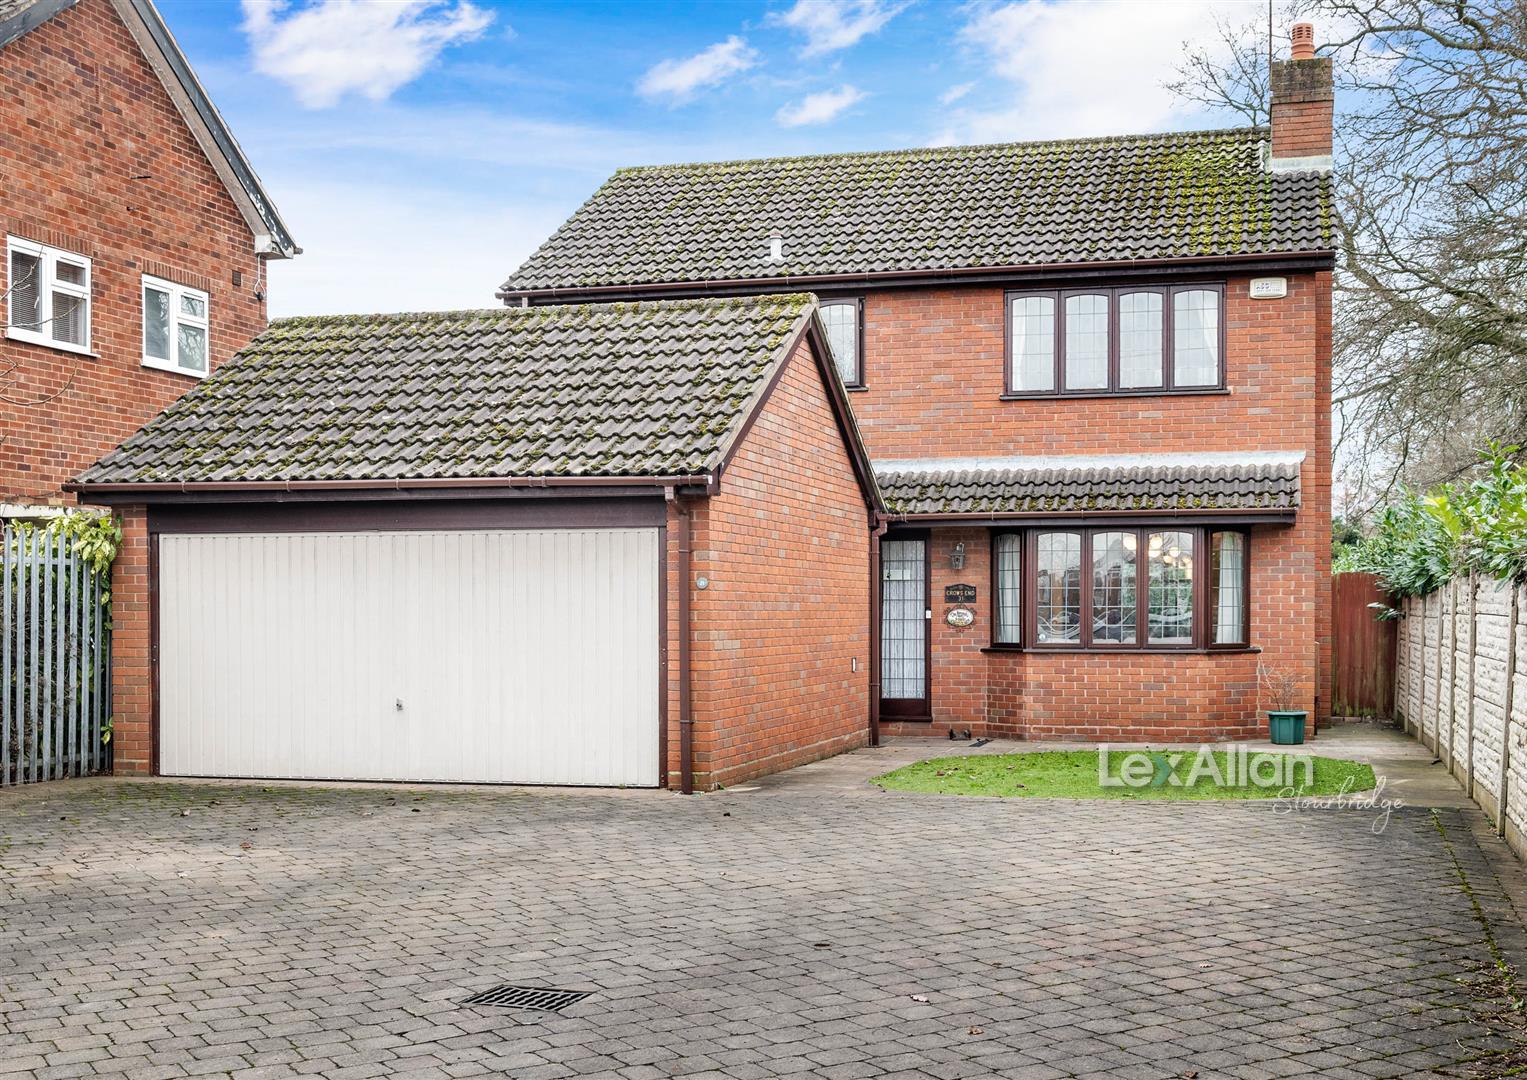 4 bed detached house for sale in Swinford Road, Stourbridge - Property Image 1